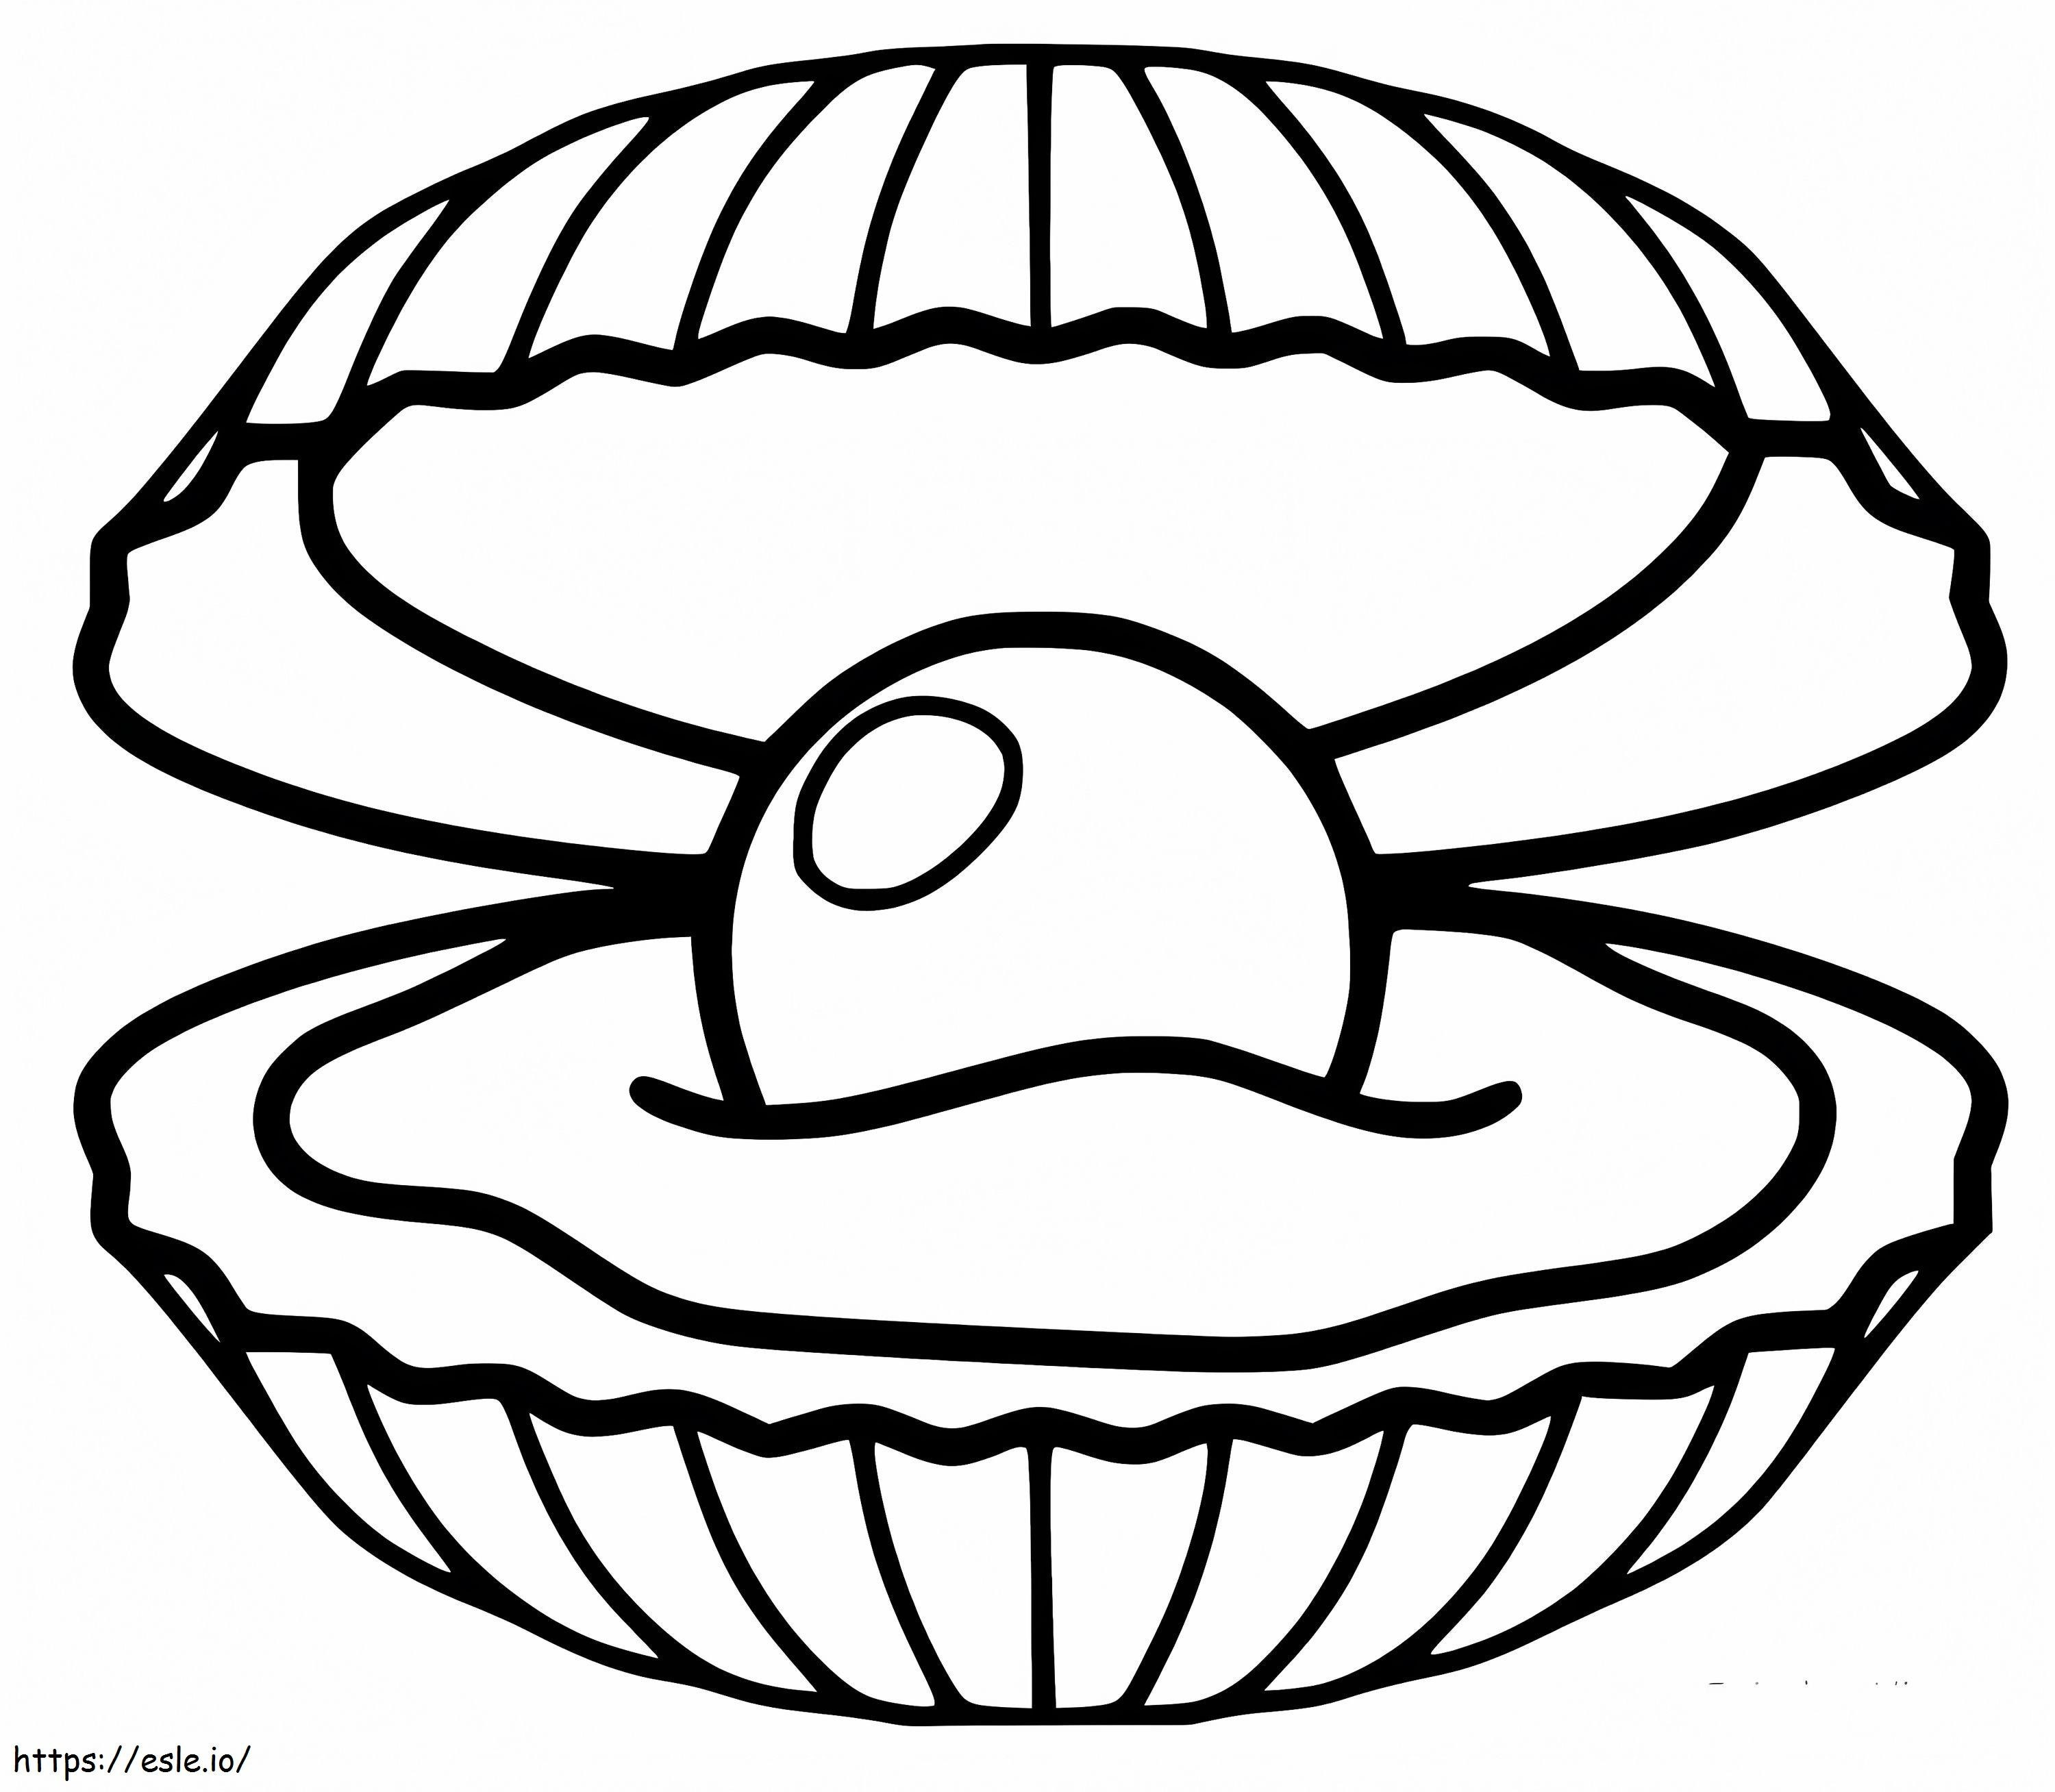 Scallop 2 coloring page